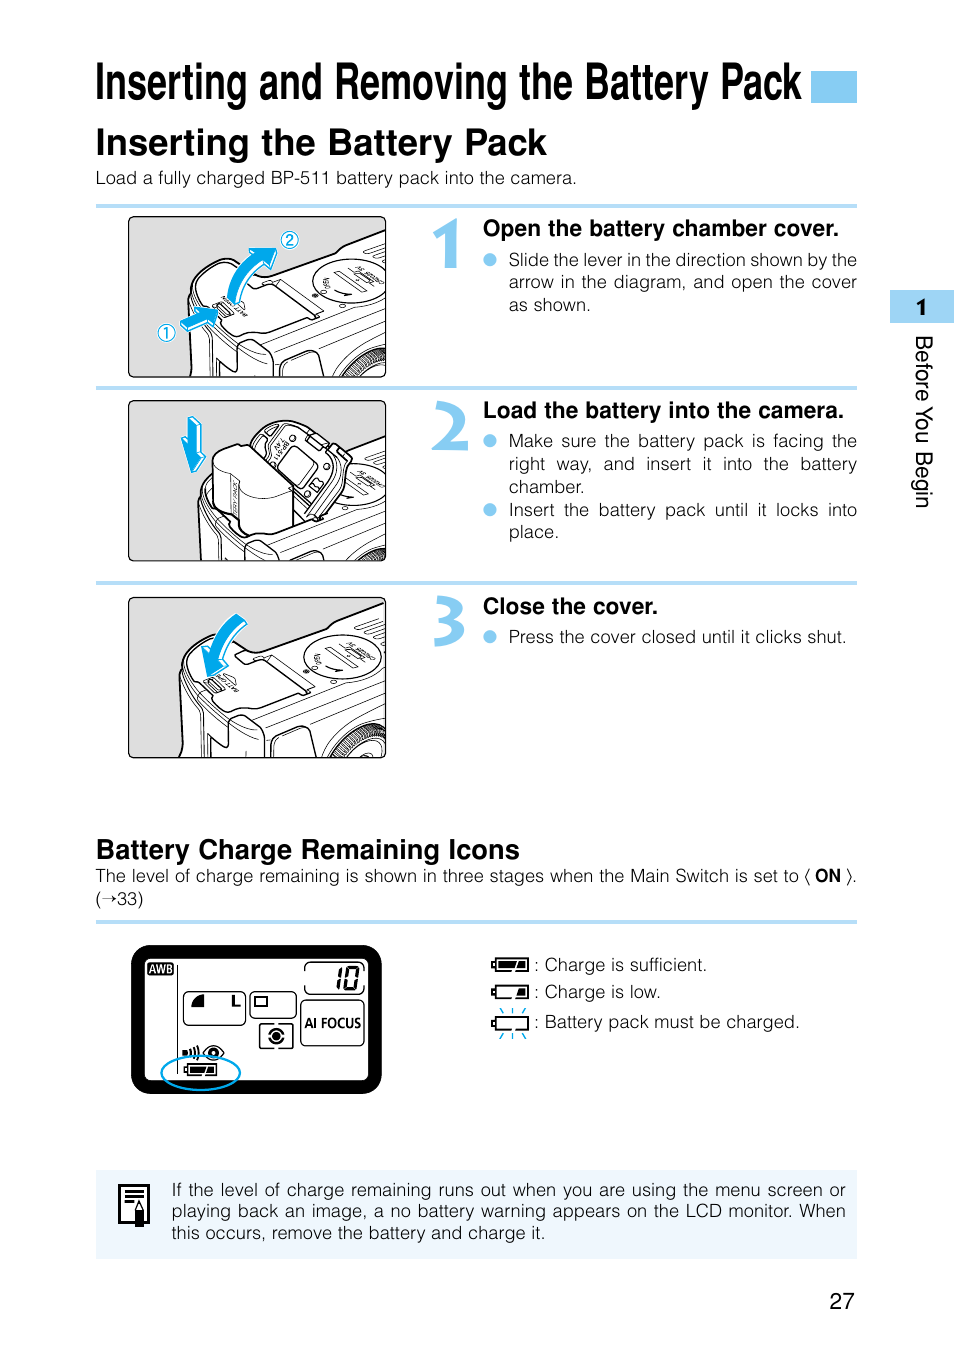 Inserting and removing the battery pack, Inserting the battery pack | Canon EOS D30 User Manual | Page 27 / 152